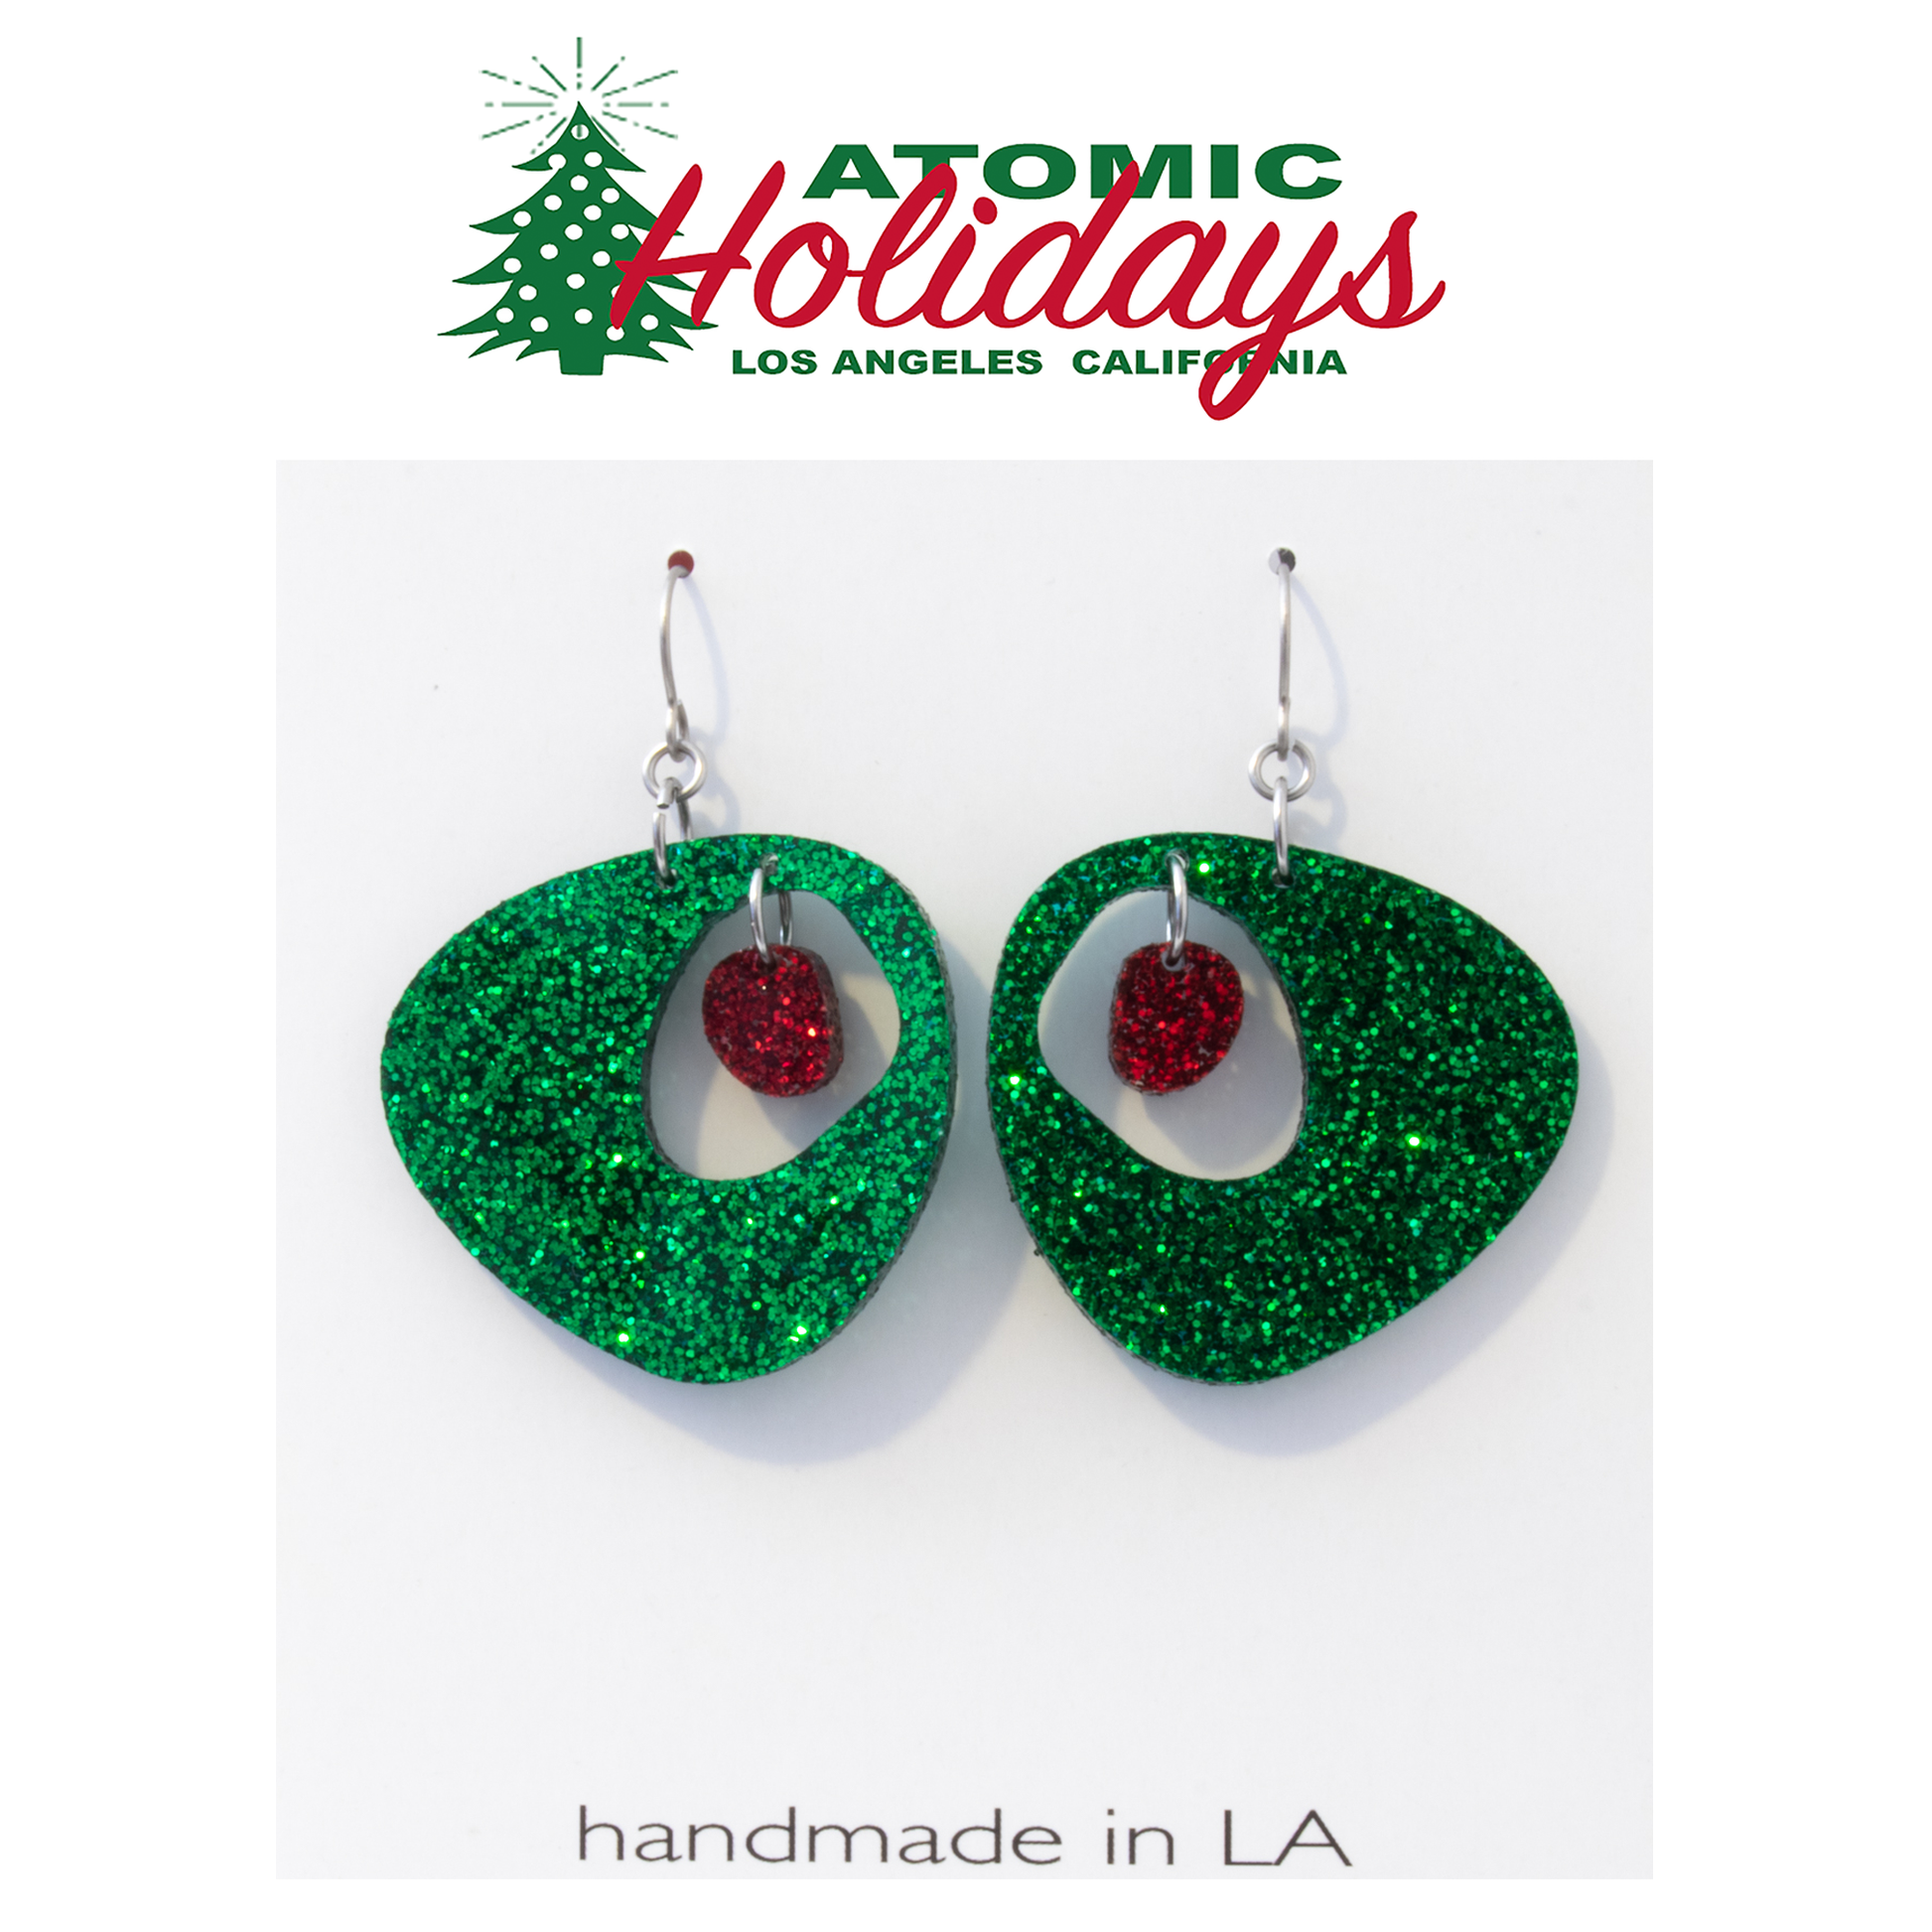 Atomic Holidays Glitter Green and Red Festive Christmas Earrings in mid century modern style by AtomicMobiles.com